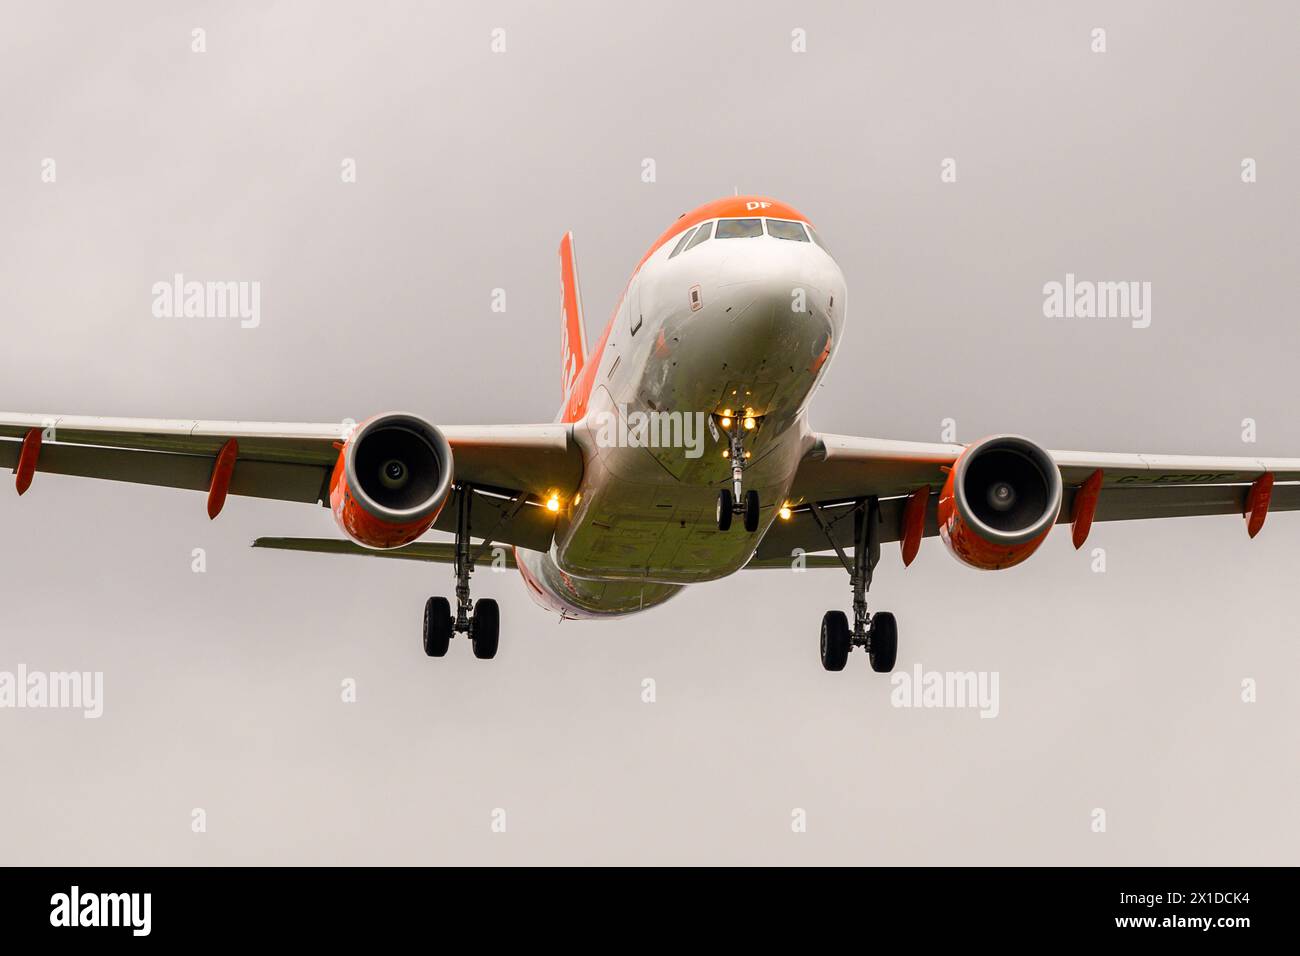 An Easyjet Airbus A319-100 on final approach to runway 15 at Birmingham Airport, Birmingham, England Stock Photo